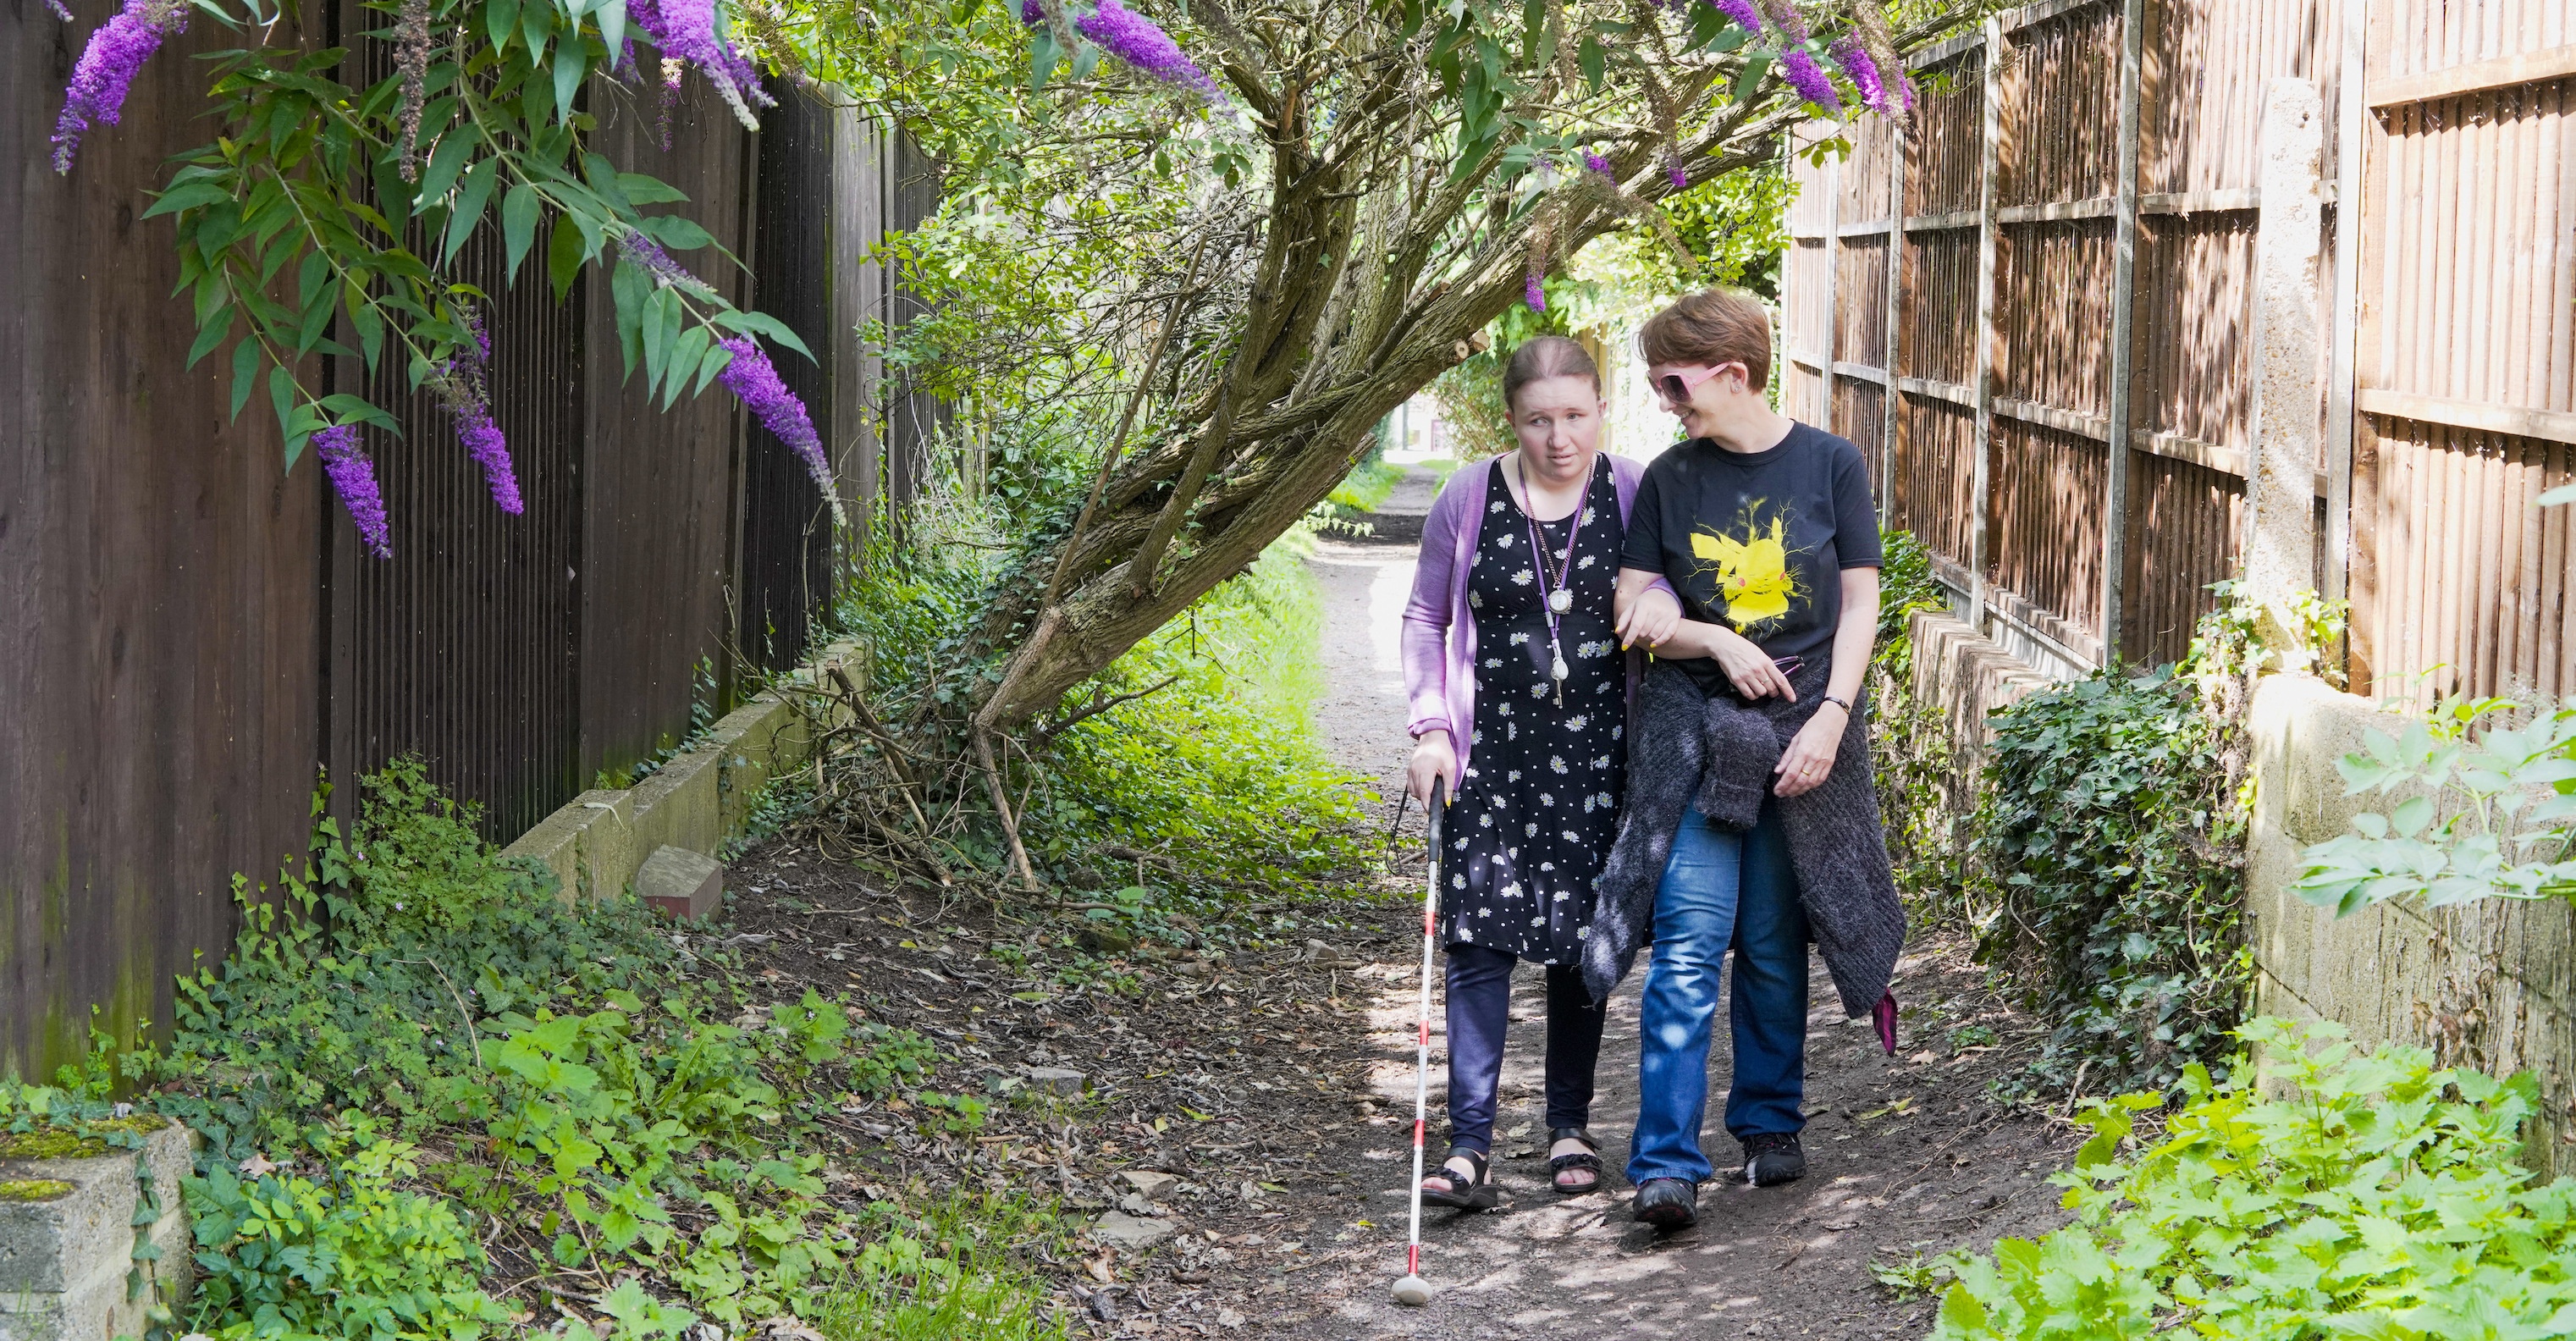 Kayleigh supported by a sighted guide